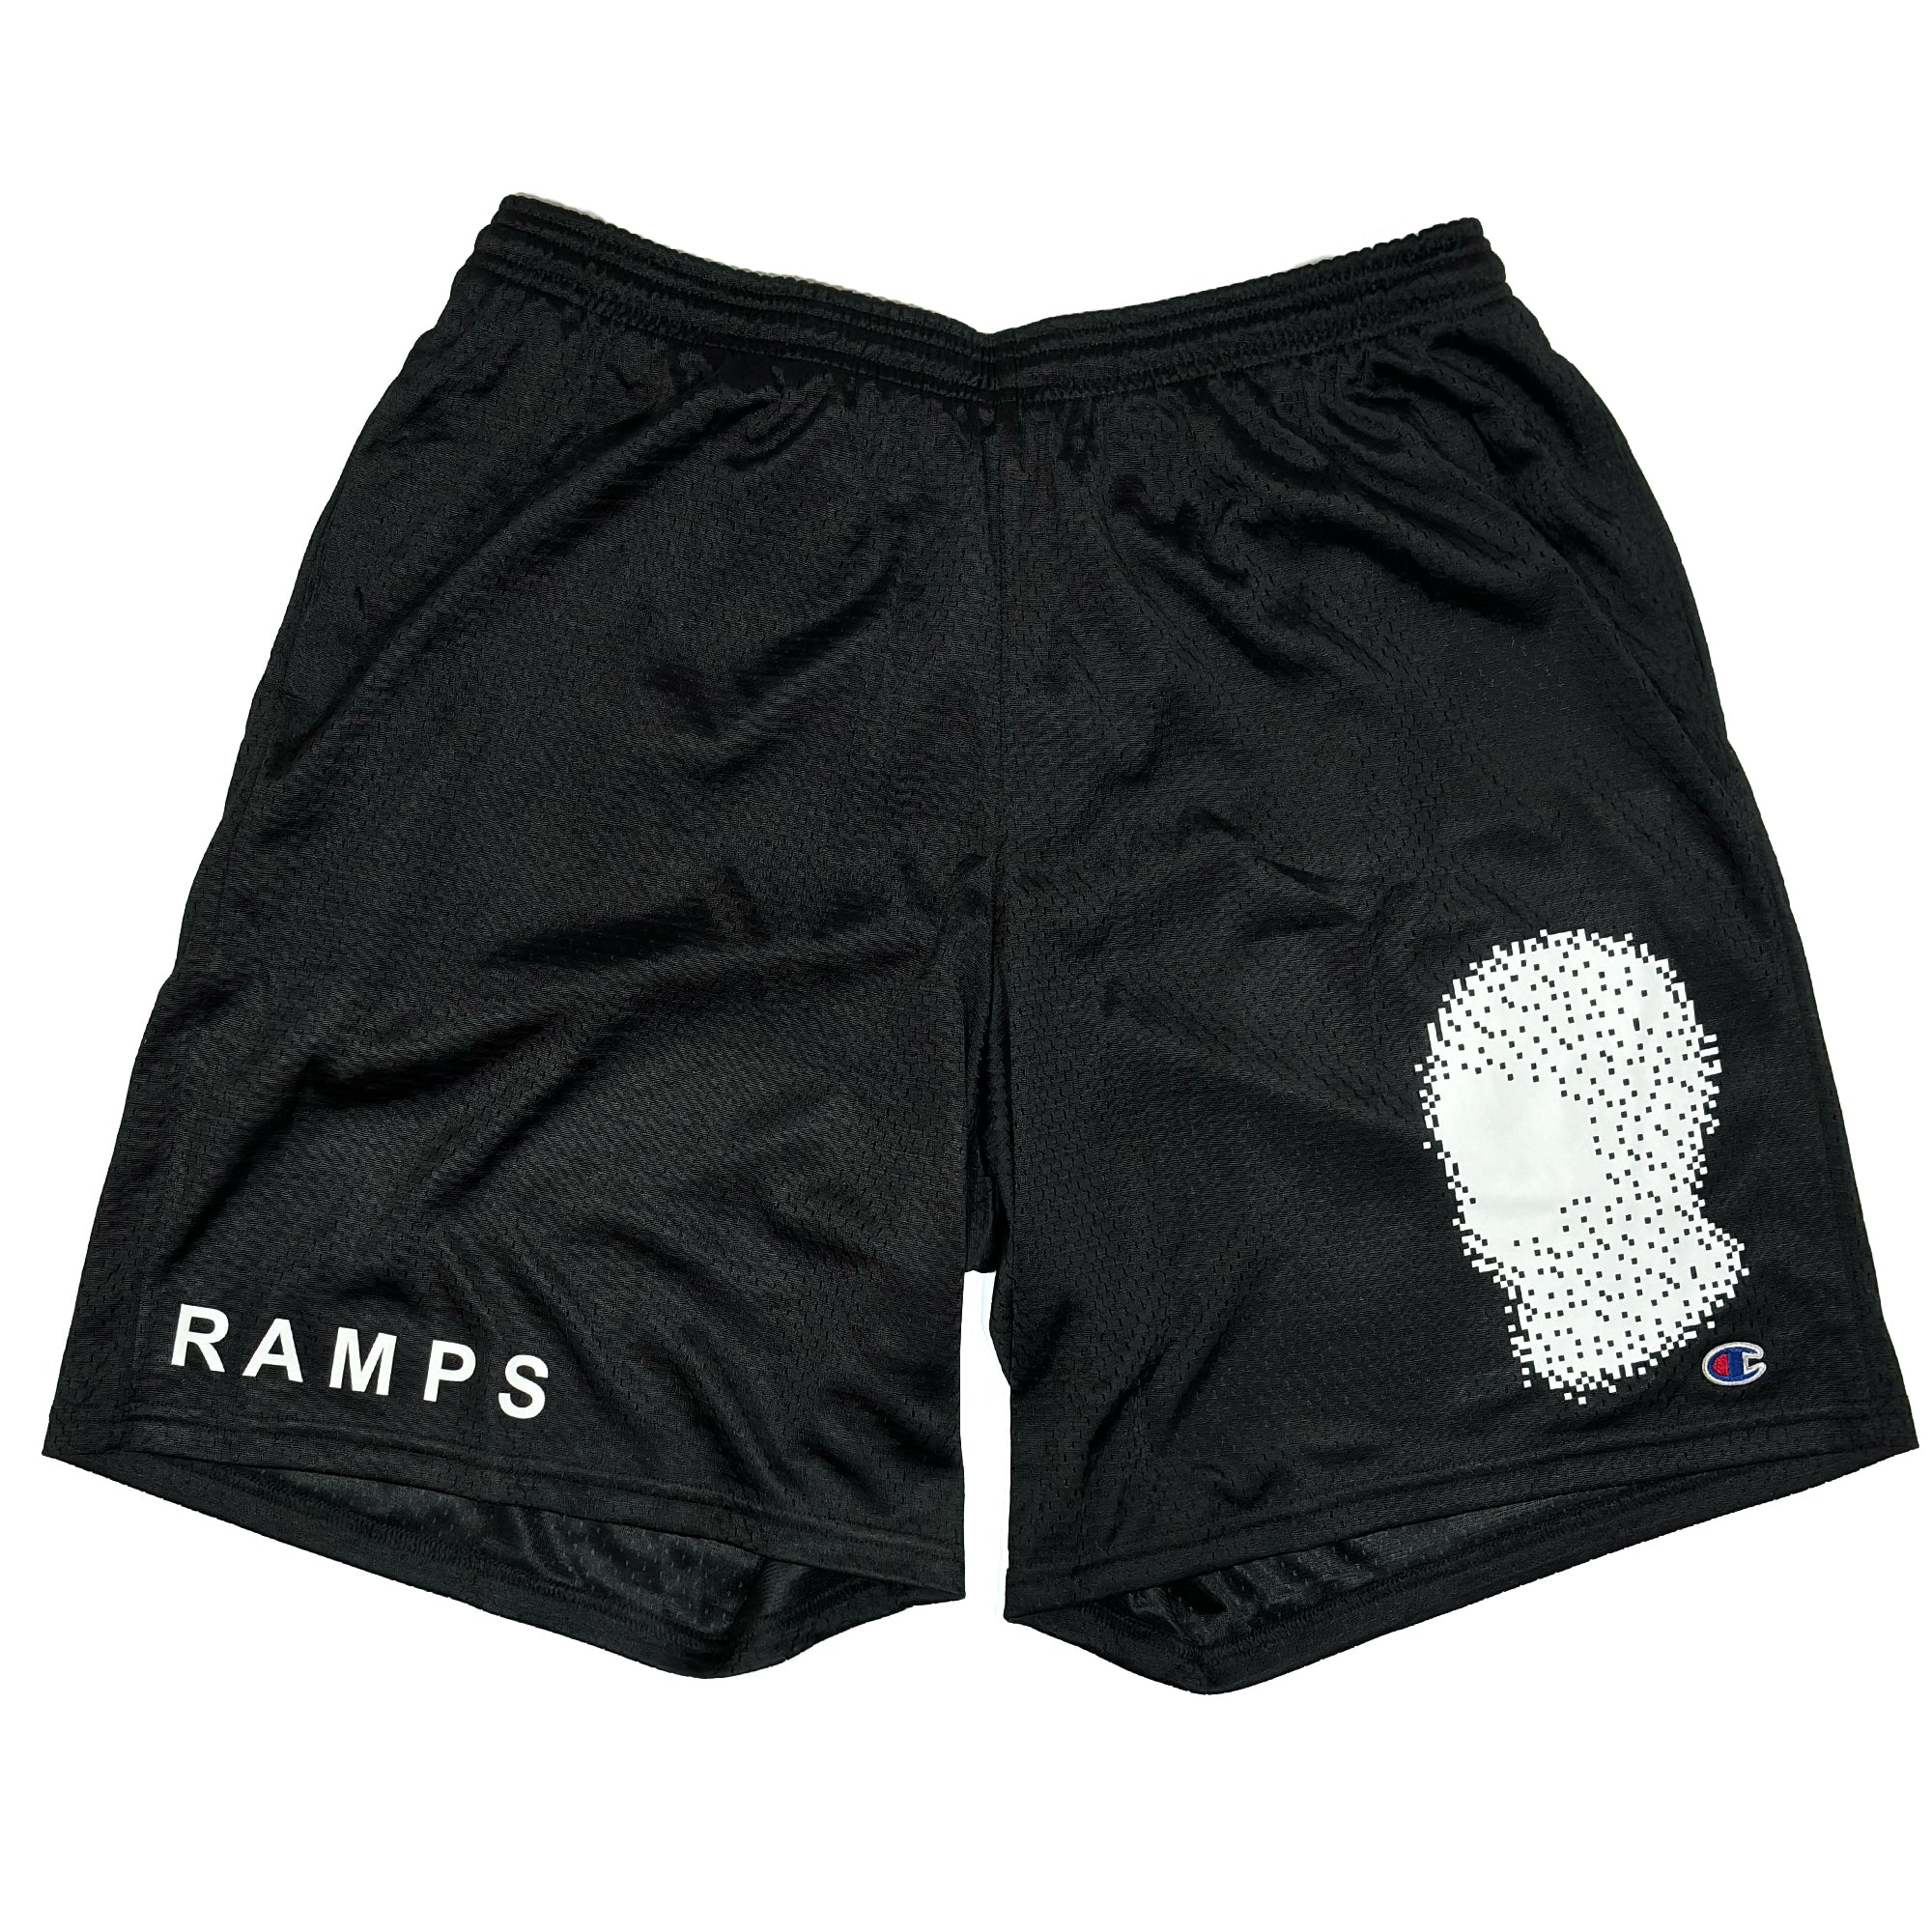 Ramps Knees Out Mesh Shorts Black